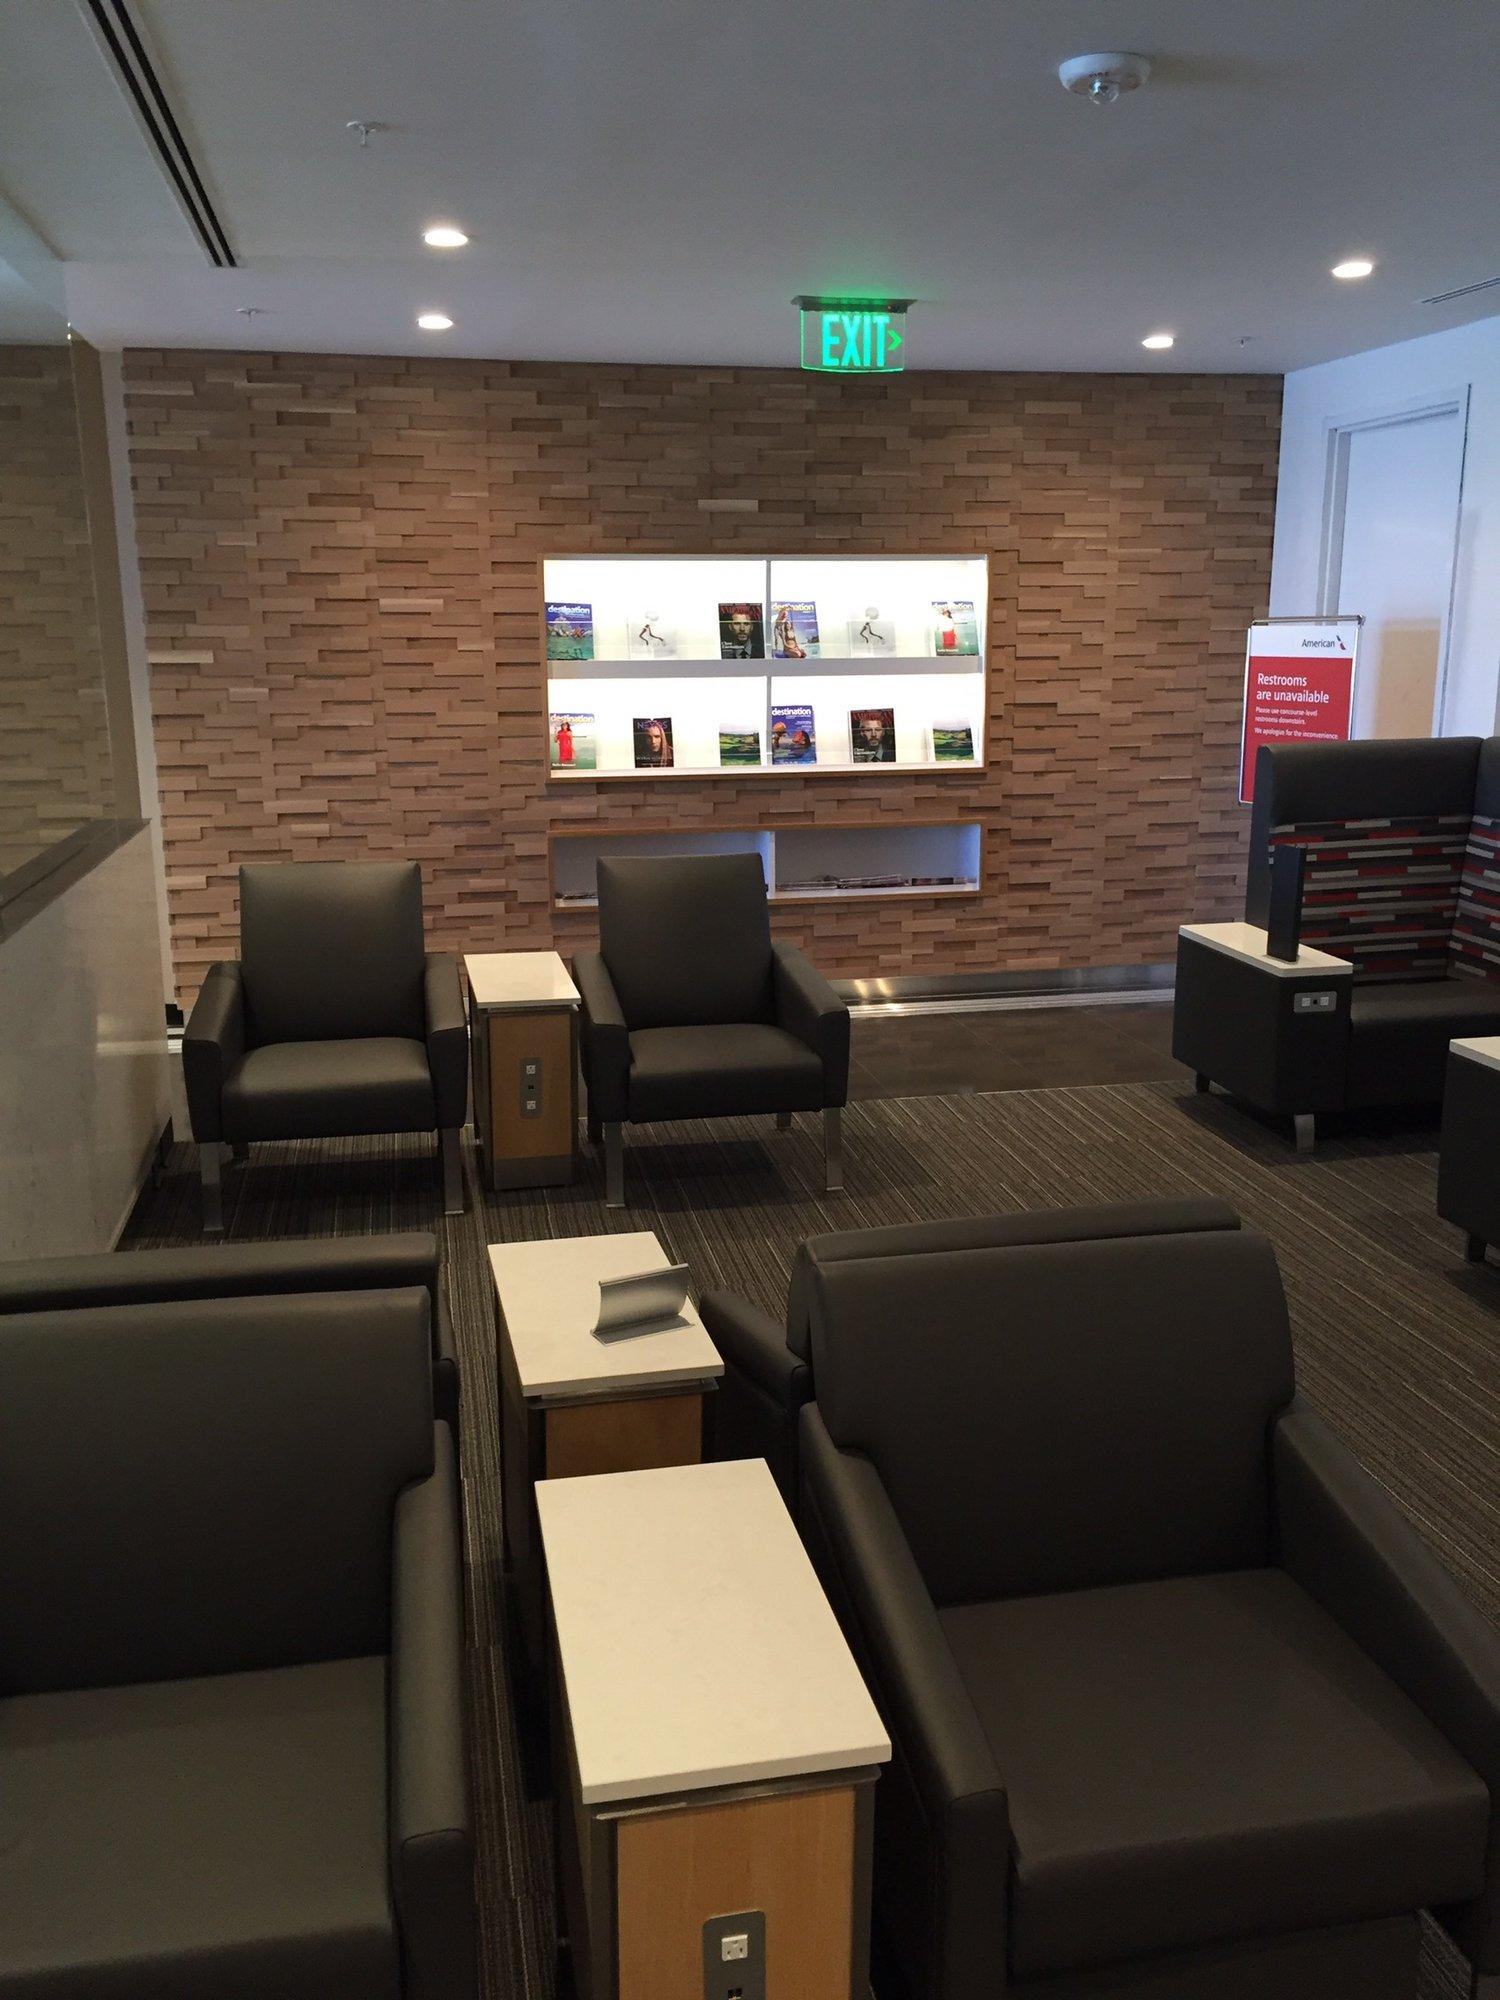 American Airlines Admirals Club (Gate D15) image 13 of 25